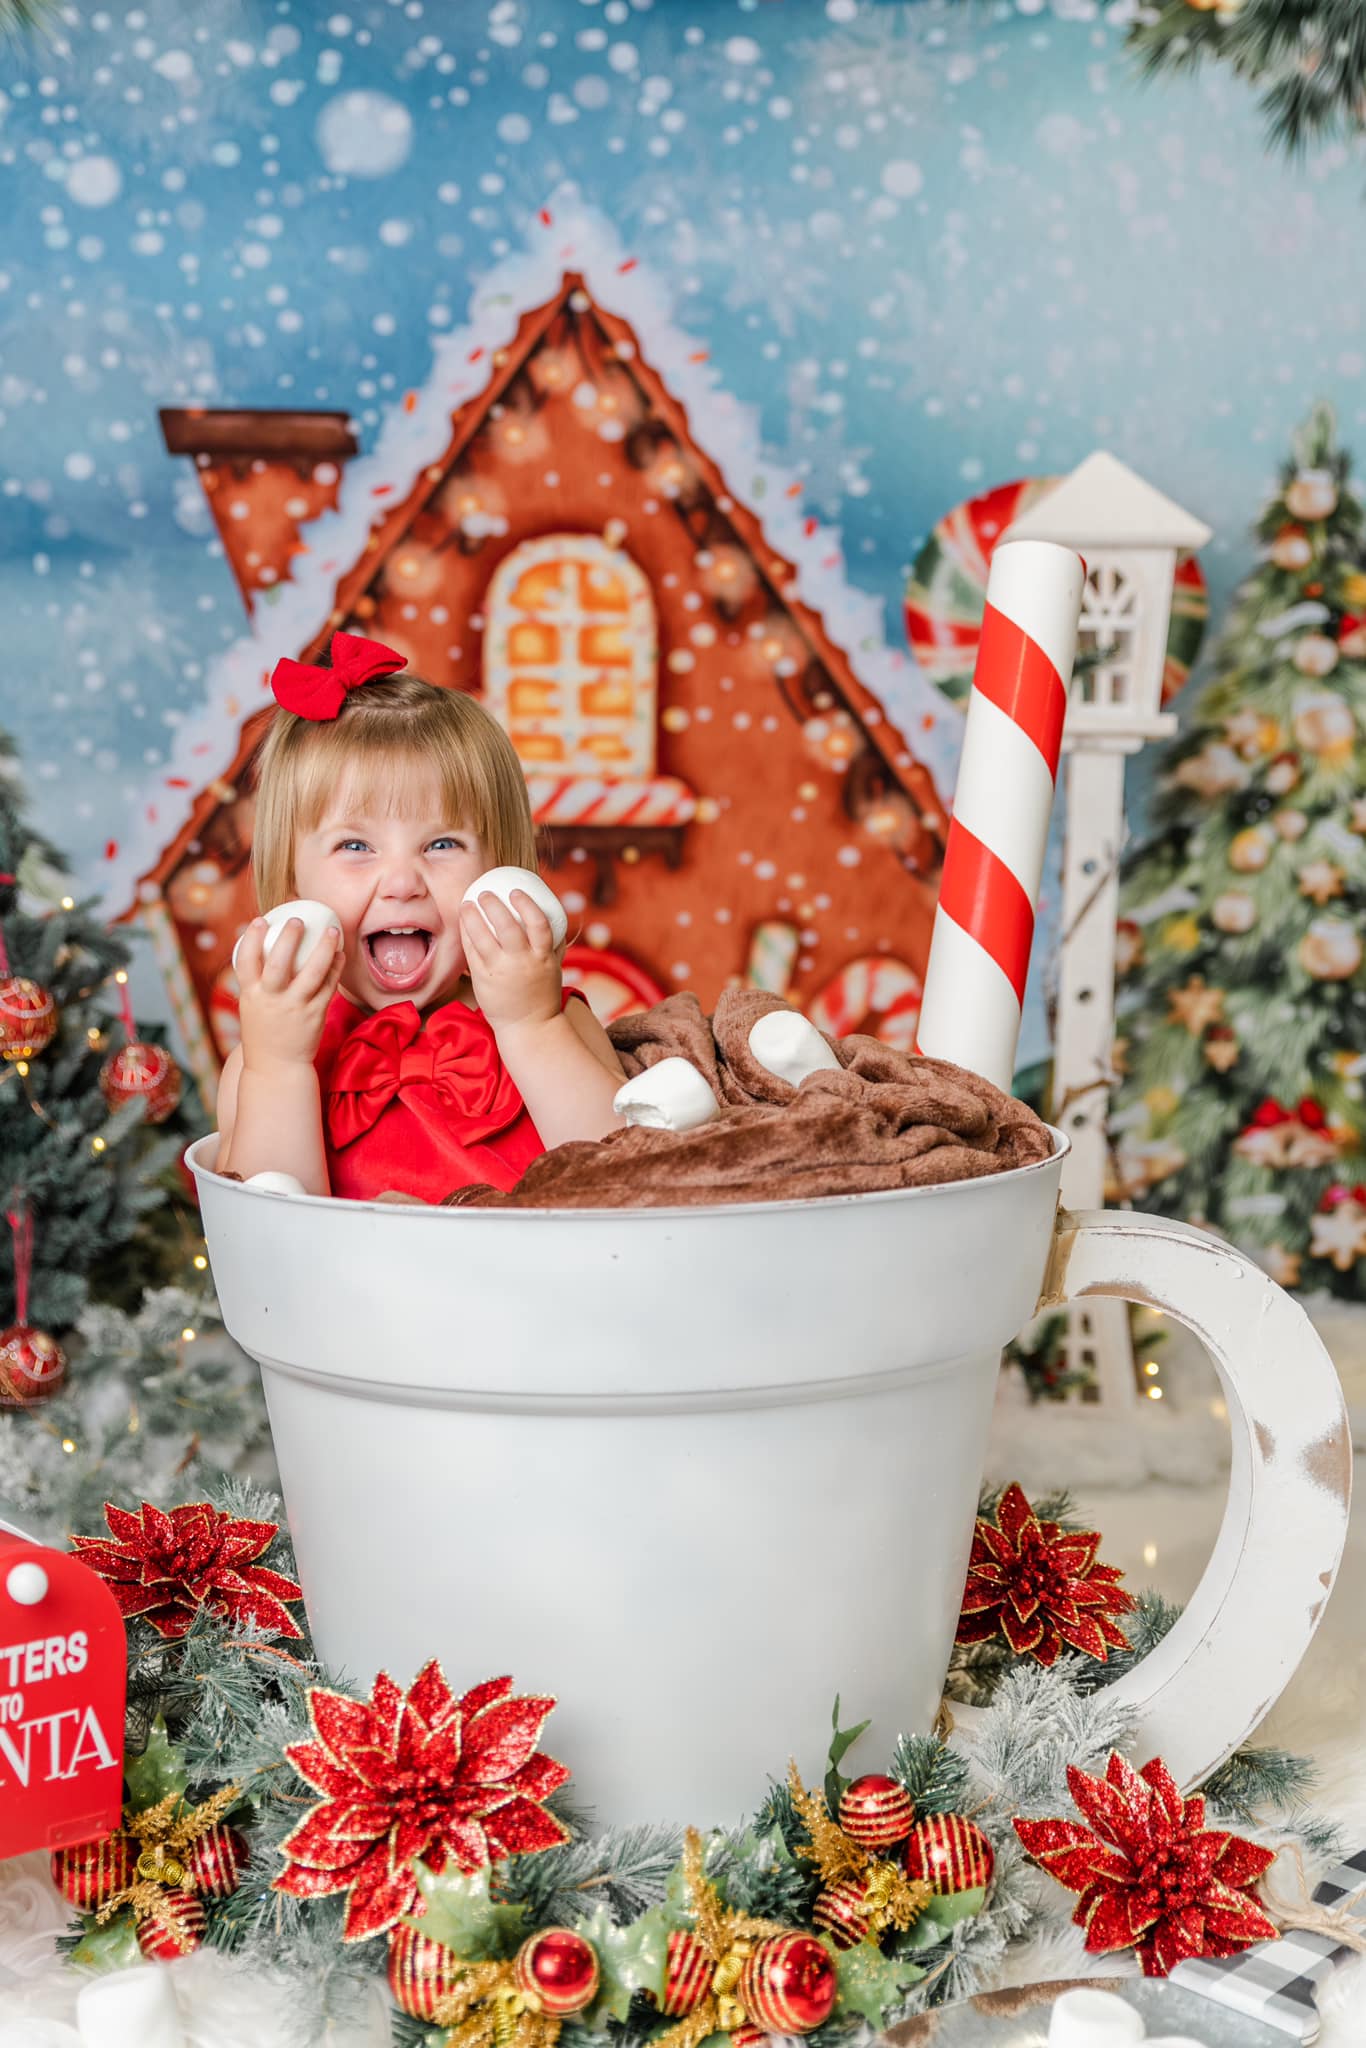 Kate Christmas Oil Painting Backdrop Candy House for Photography